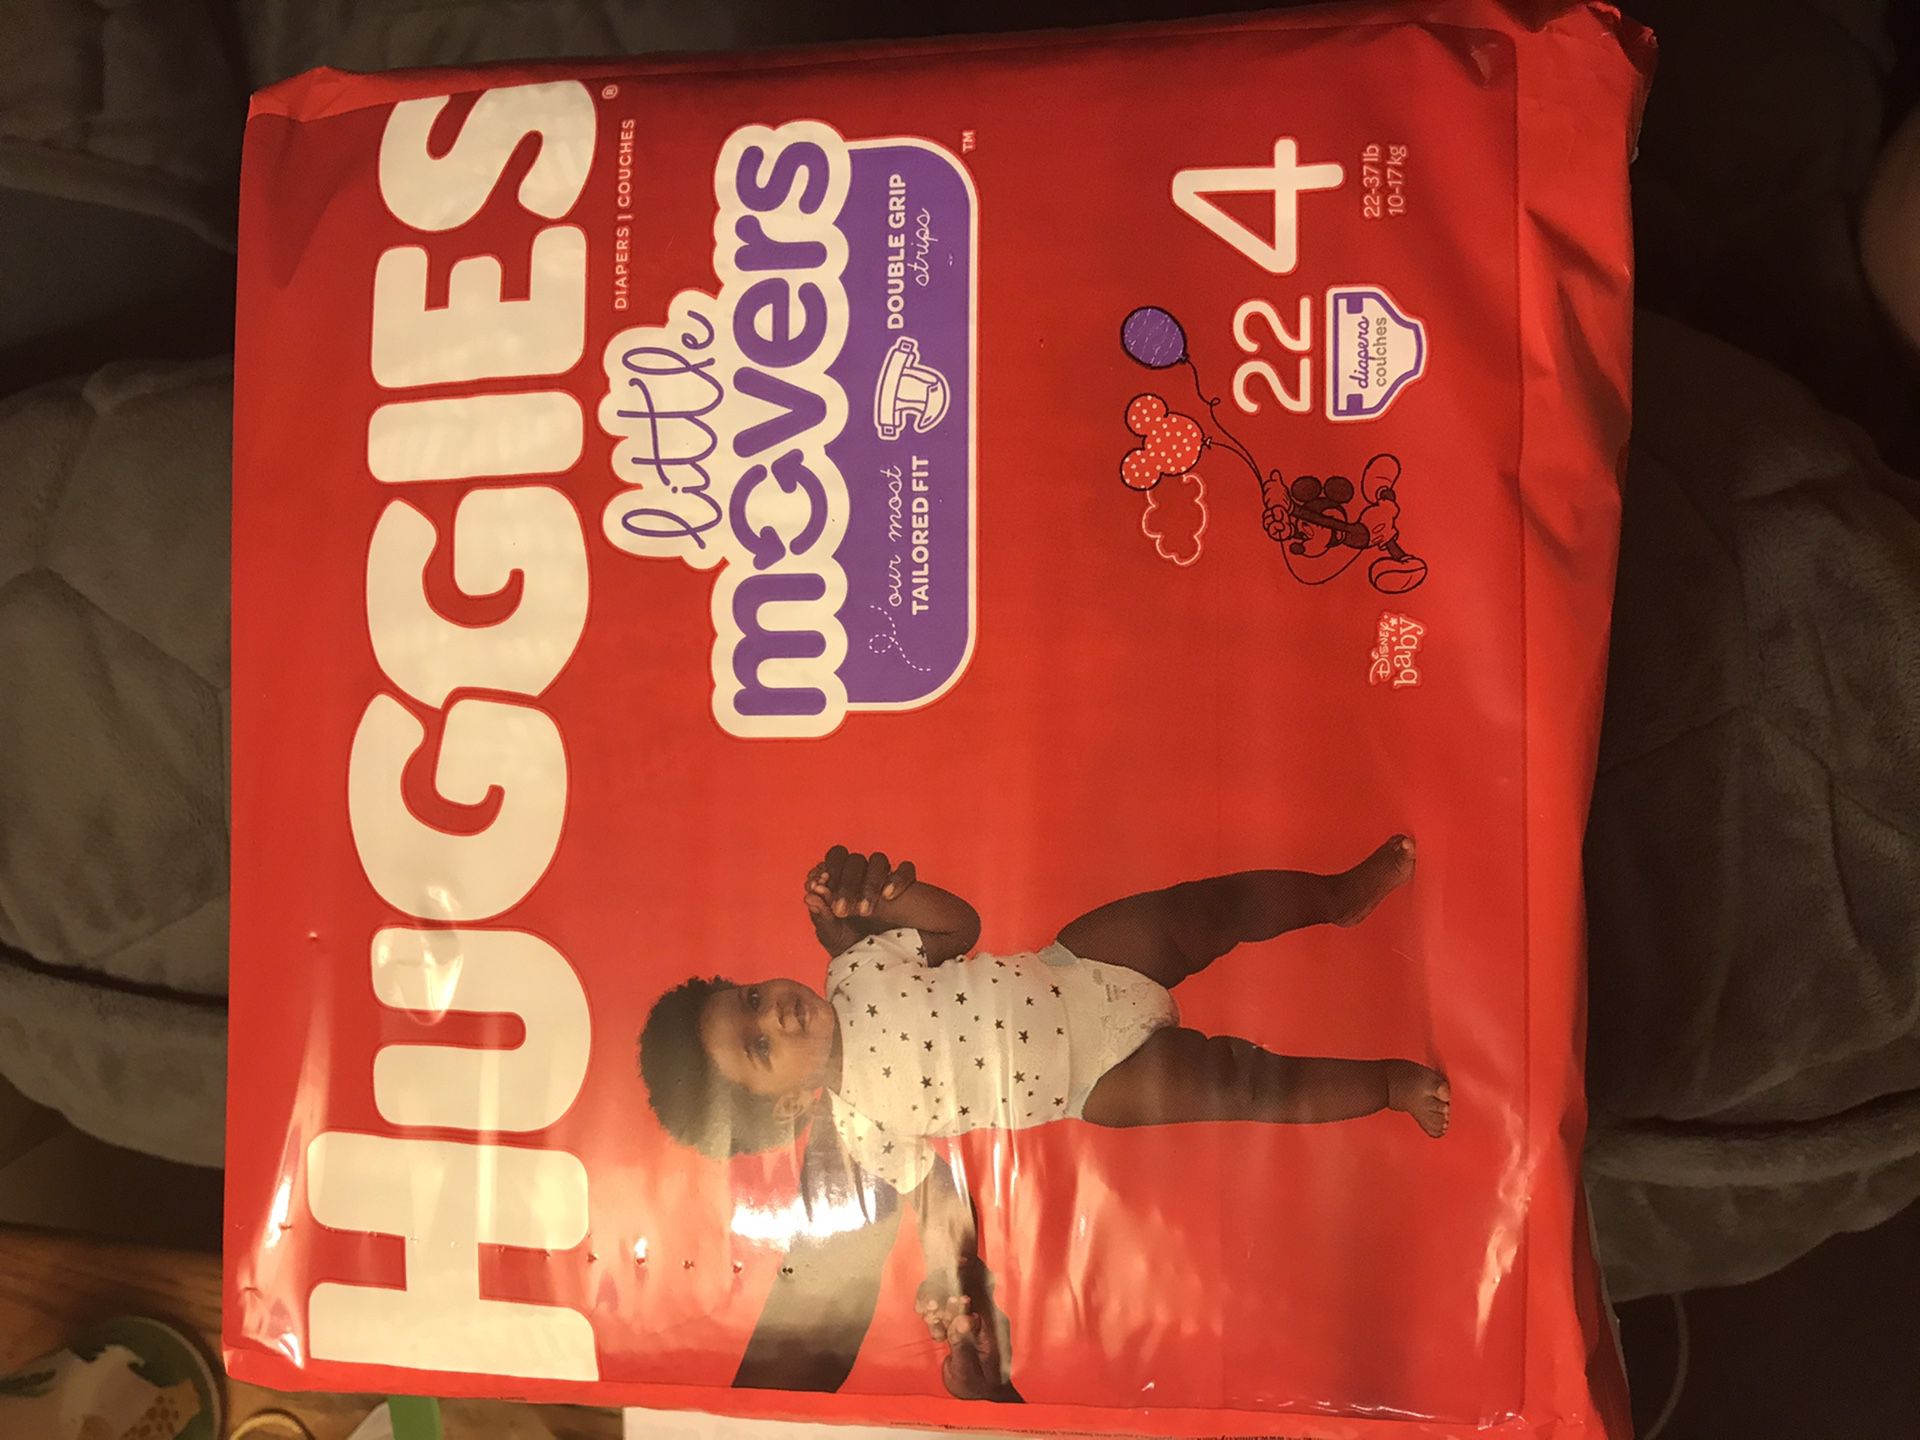 Huggies Little movers size 4